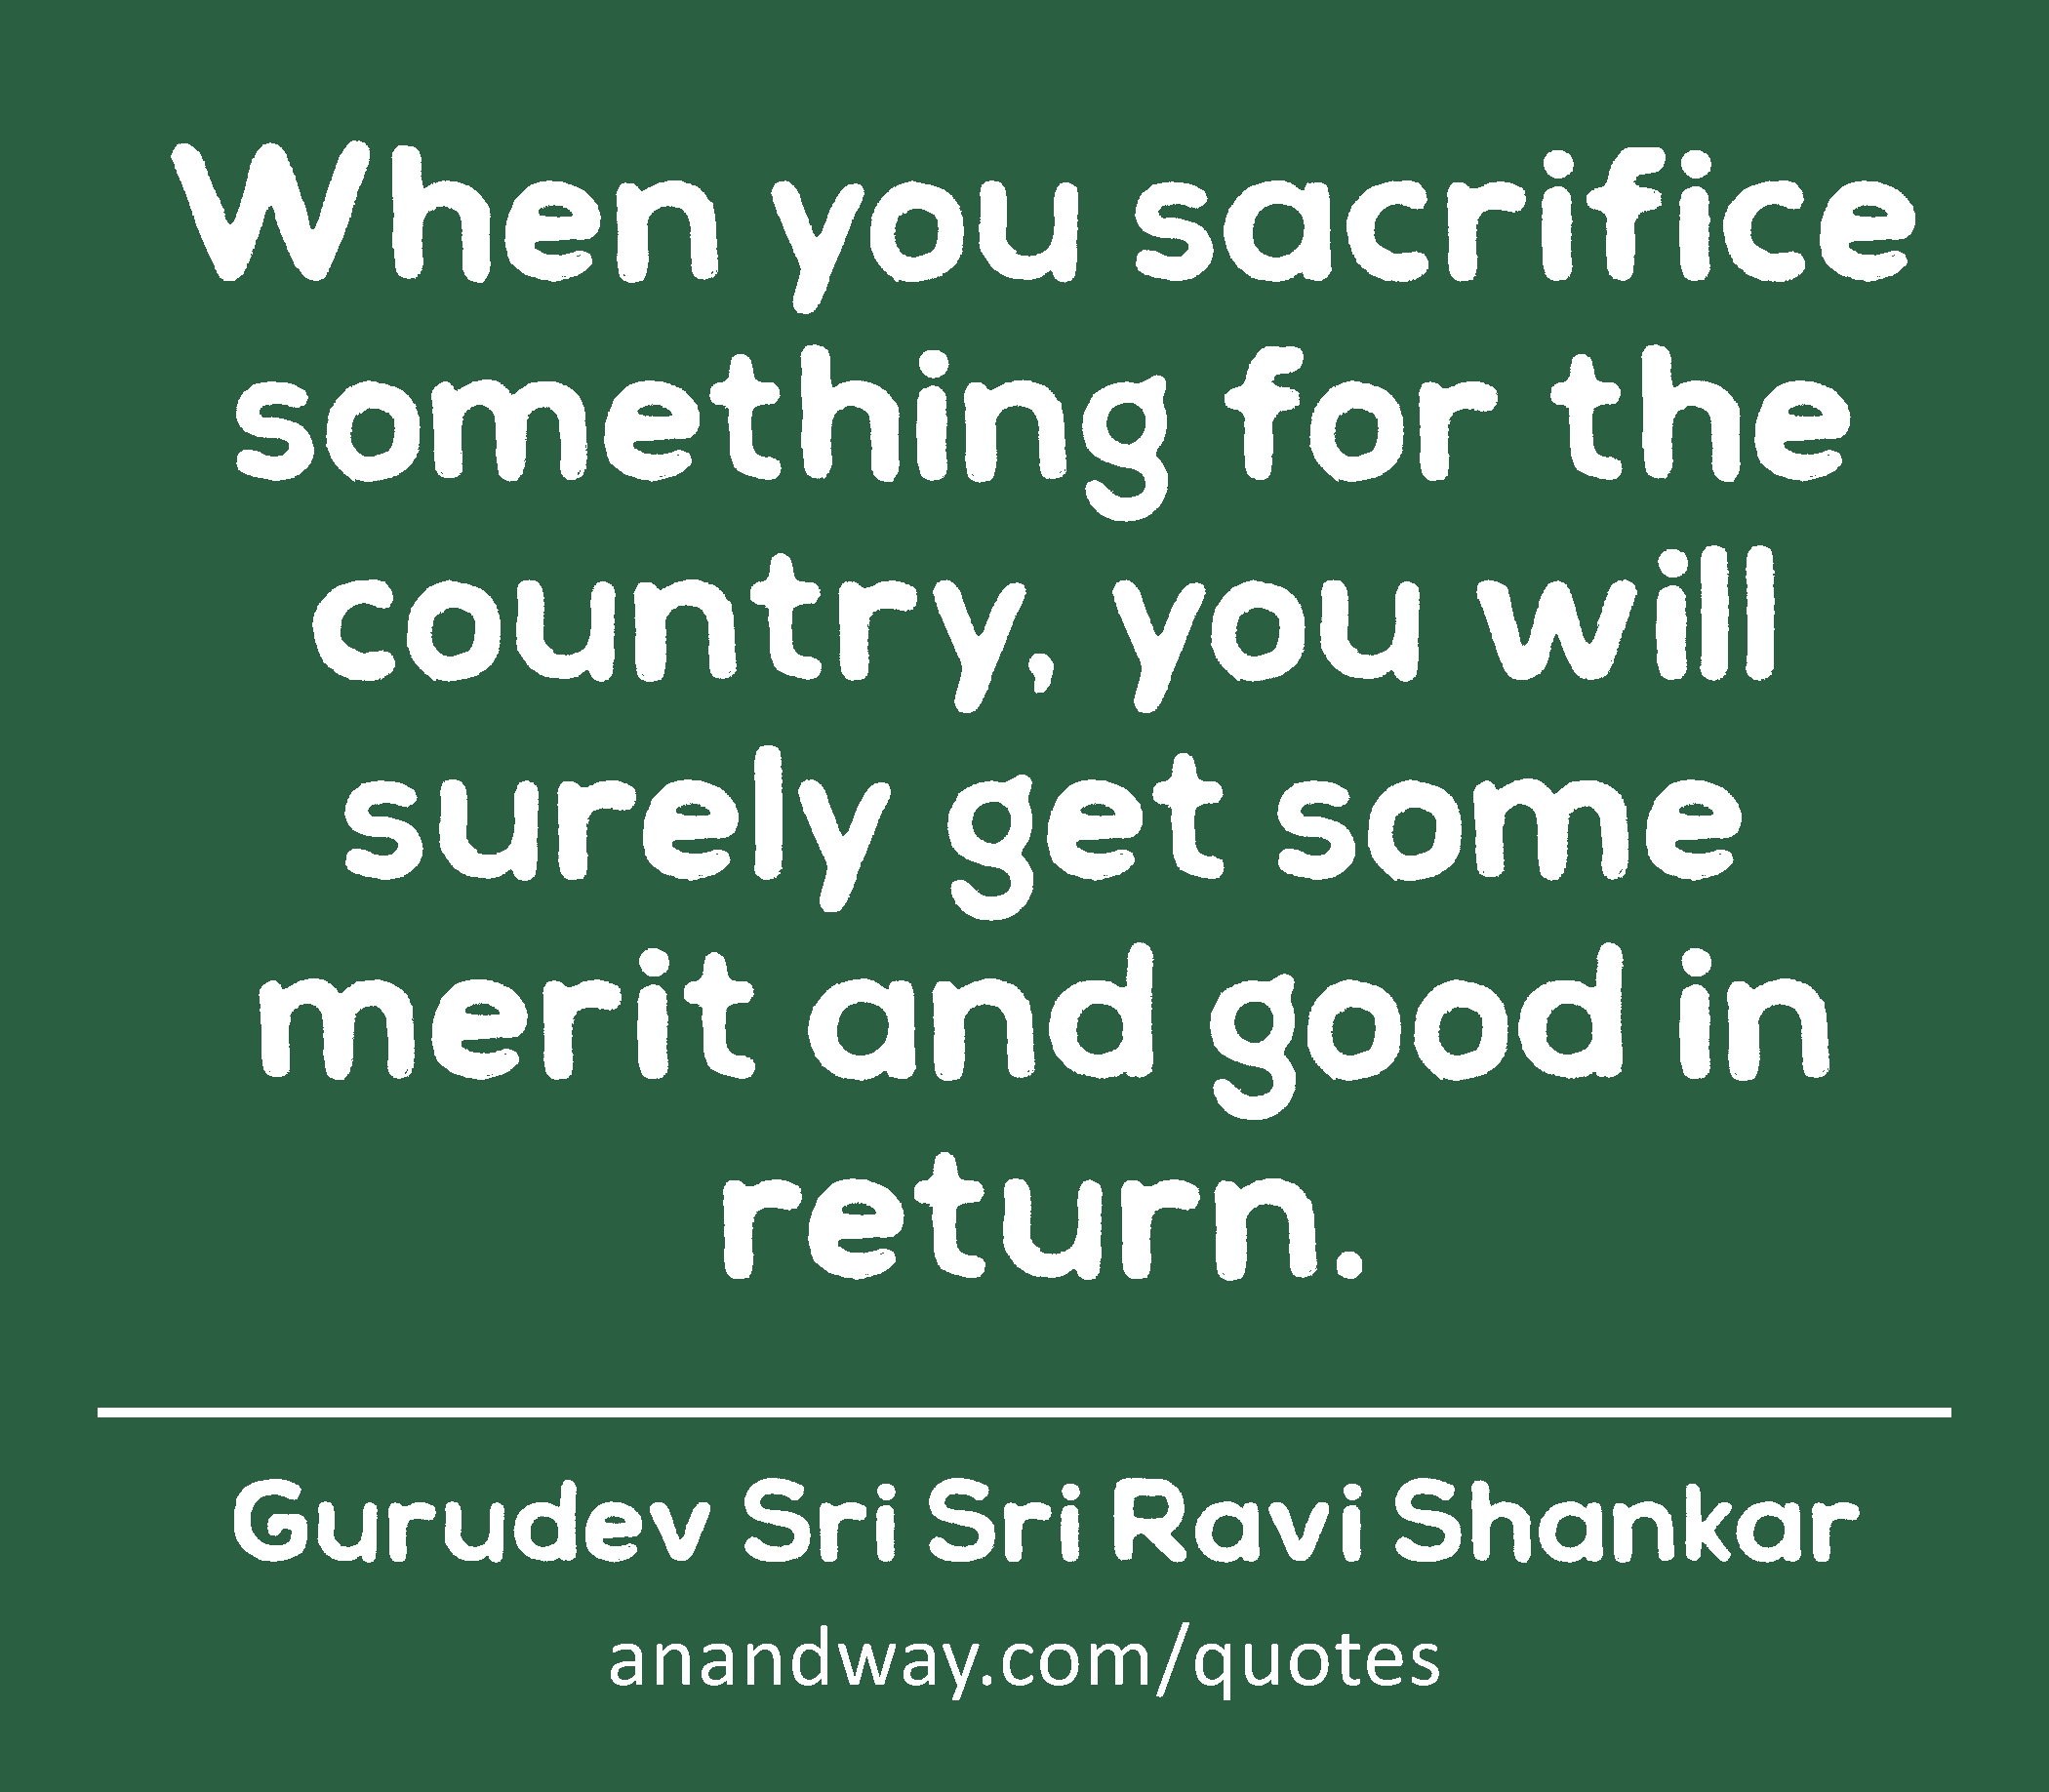 When you sacrifice something for the country, you will surely get some merit and good in return.
 -Gurudev Sri Sri Ravi Shankar